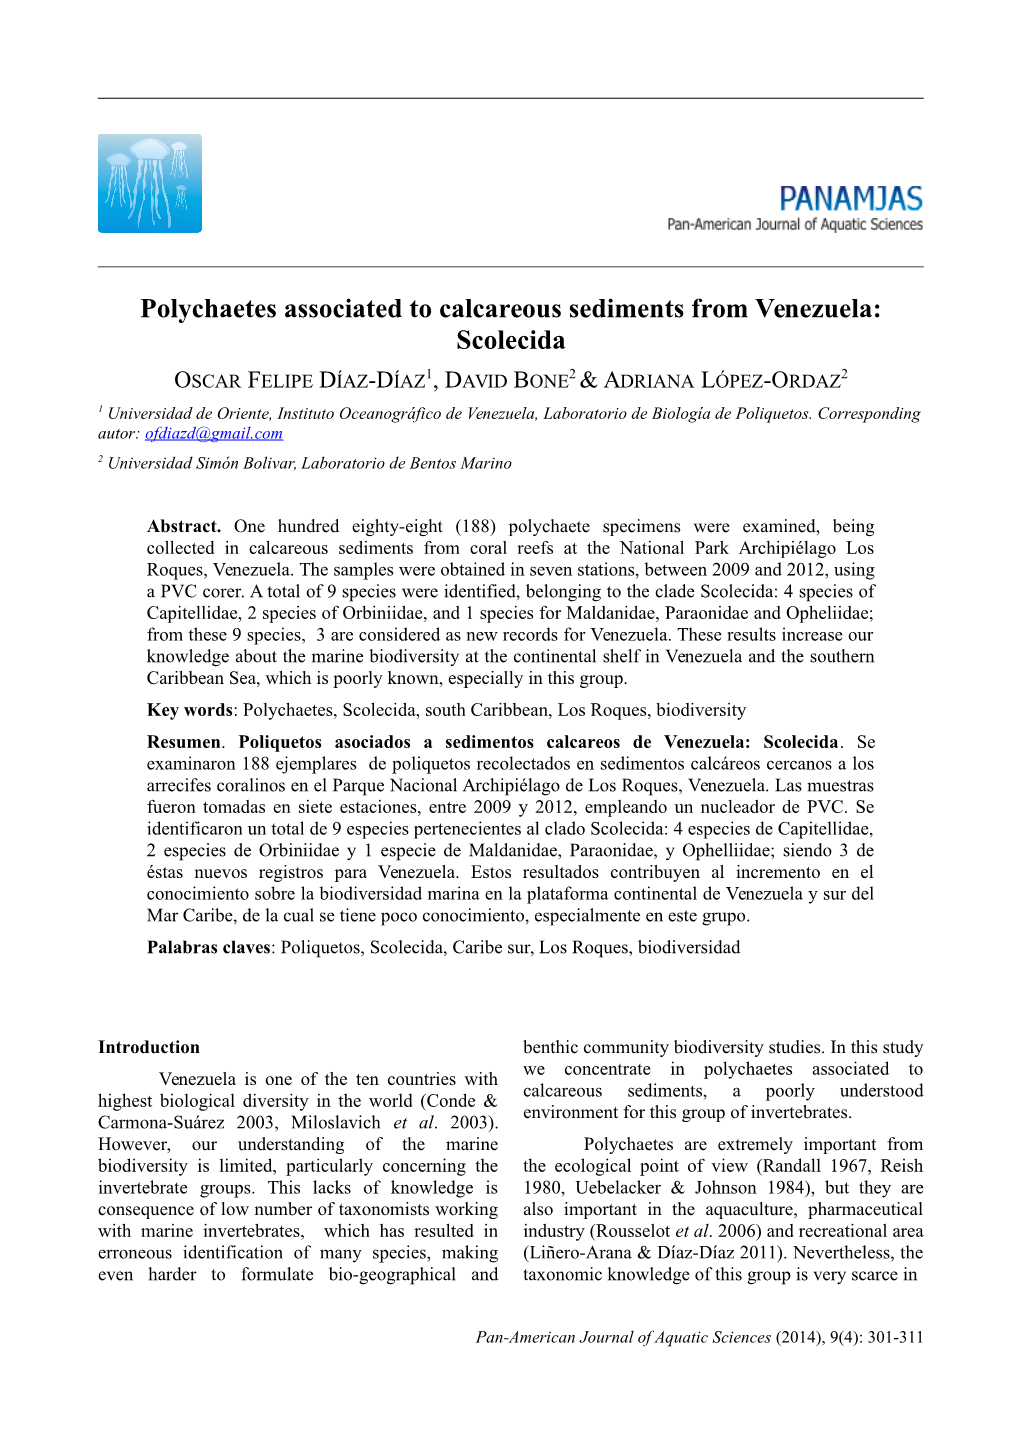 Polychaetes Associated to Calcareous Sediments from Venezuela